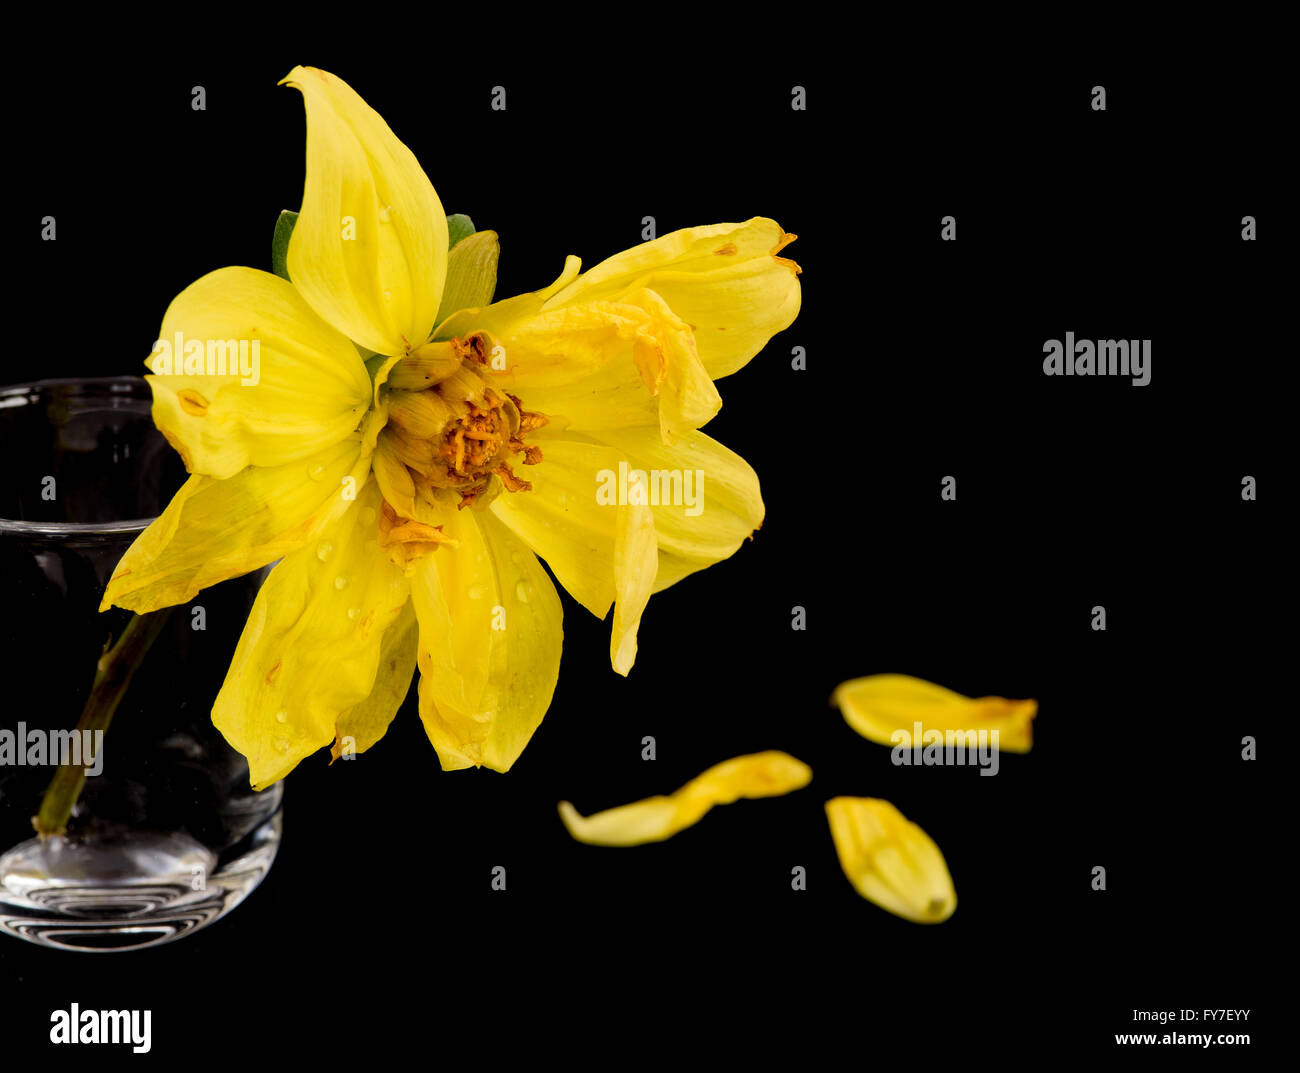 Yellow wither dying dahlia flower on a glass pot isolated on a black background Stock Photo